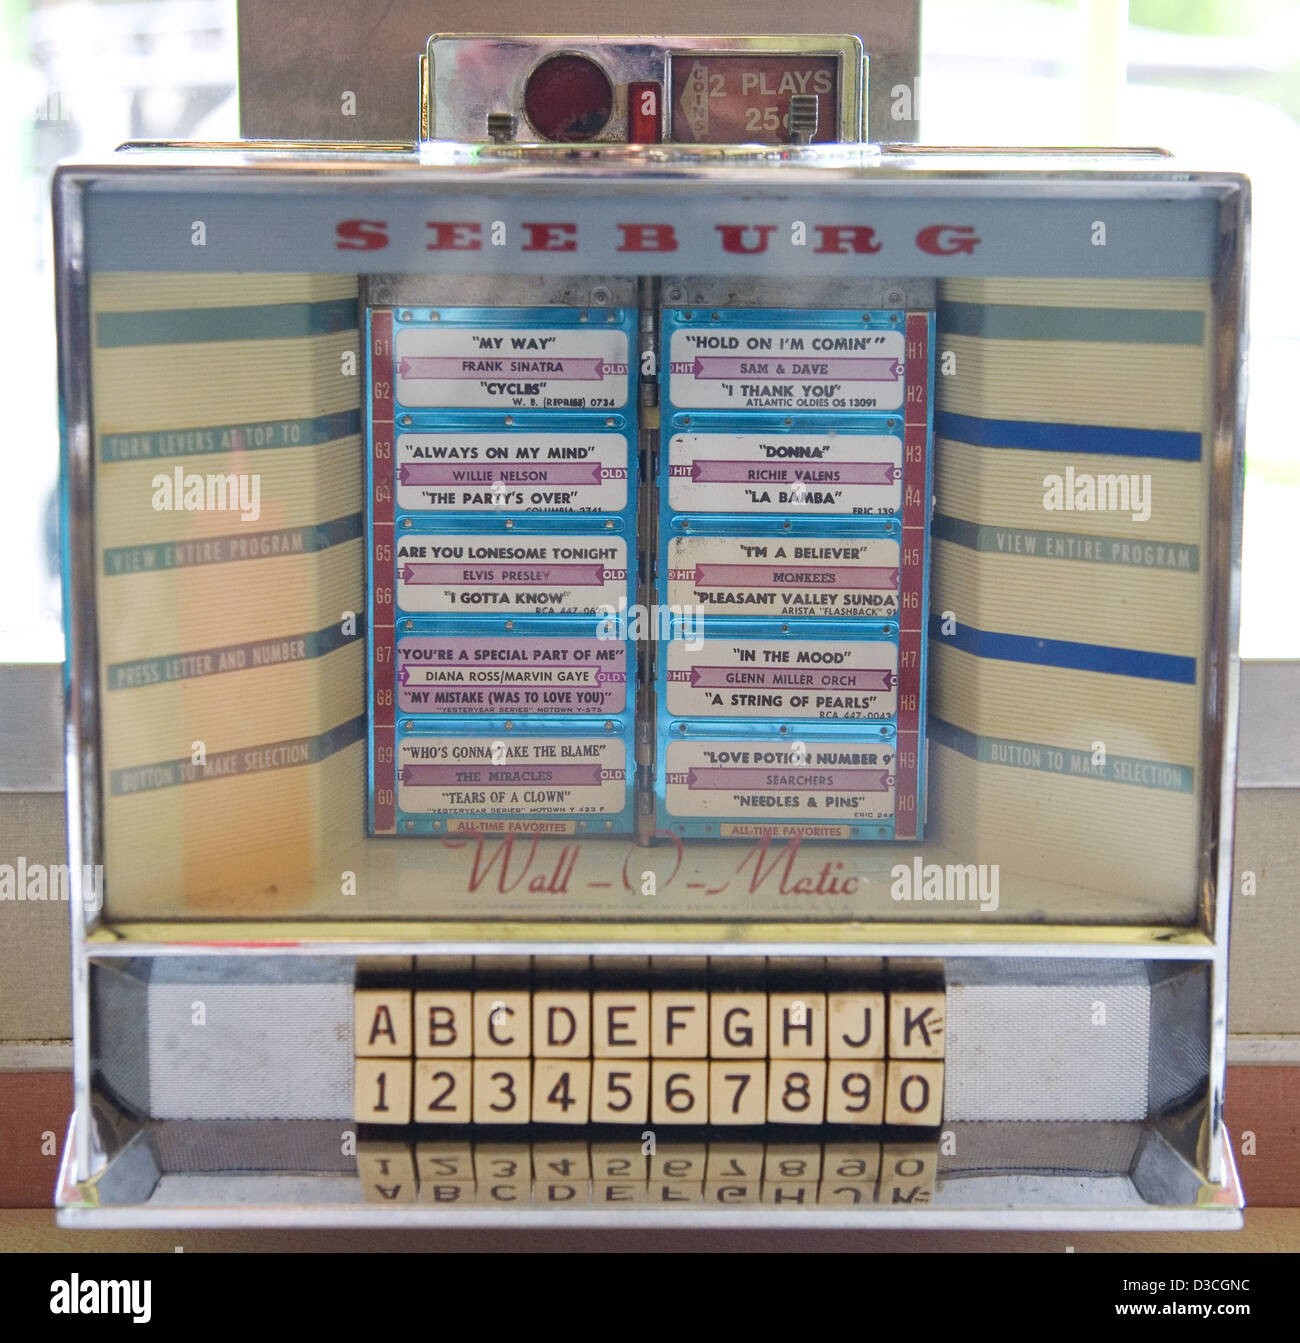 Old Style Jukebox In New York Diner, New York, Usa Stock Photo